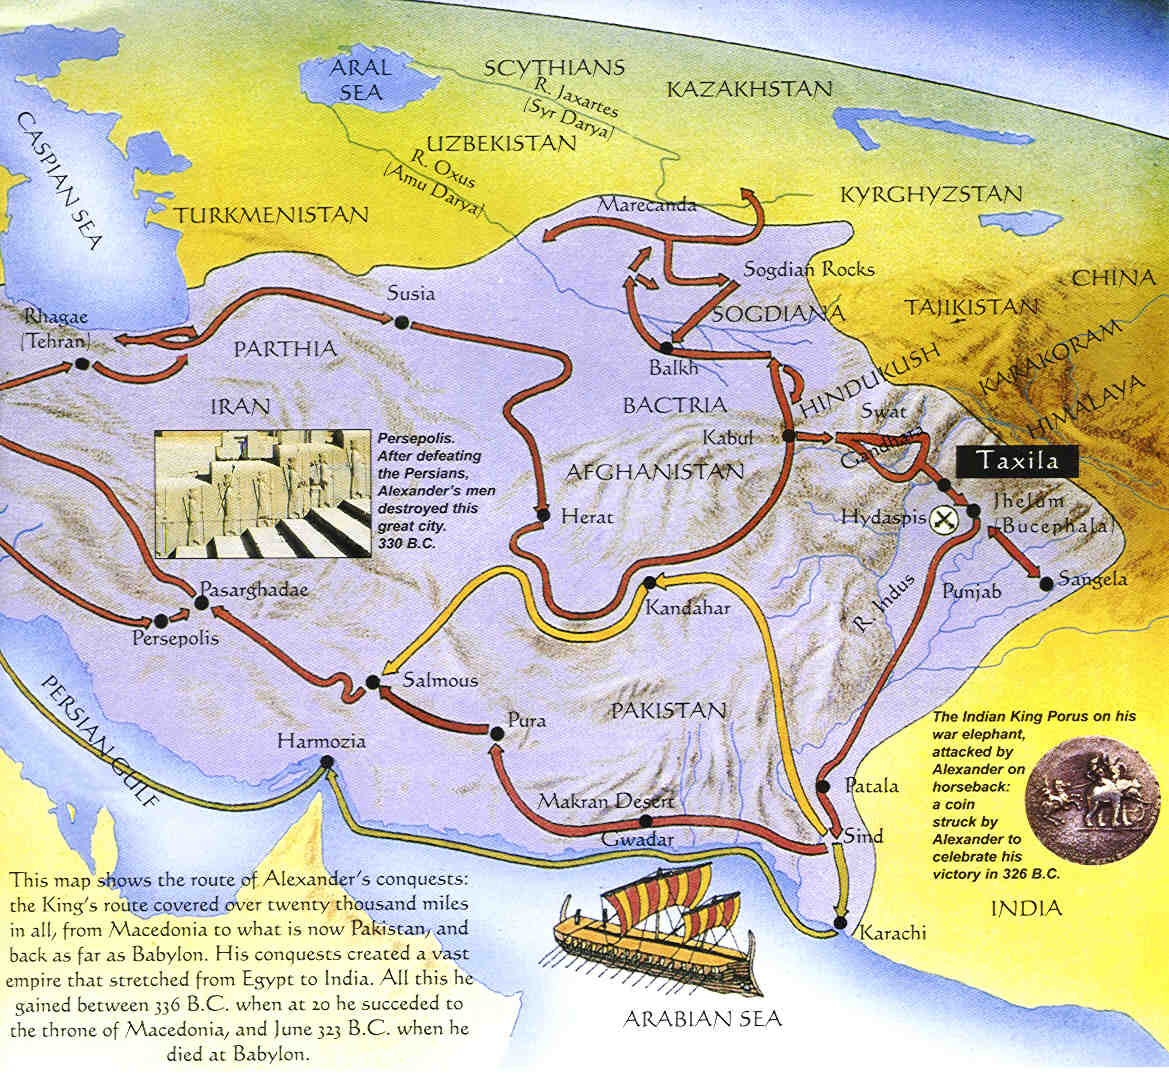 29/89Following Alexander's example, Seleucus kept the satrapy system intact. This helped him govern efficiently and focus his efforts in Syria feuding with the Ptolemies.The wealthiest of his satrapies was a remote Greek enclave between Hindu Kush and Amu Darya — Bactria.